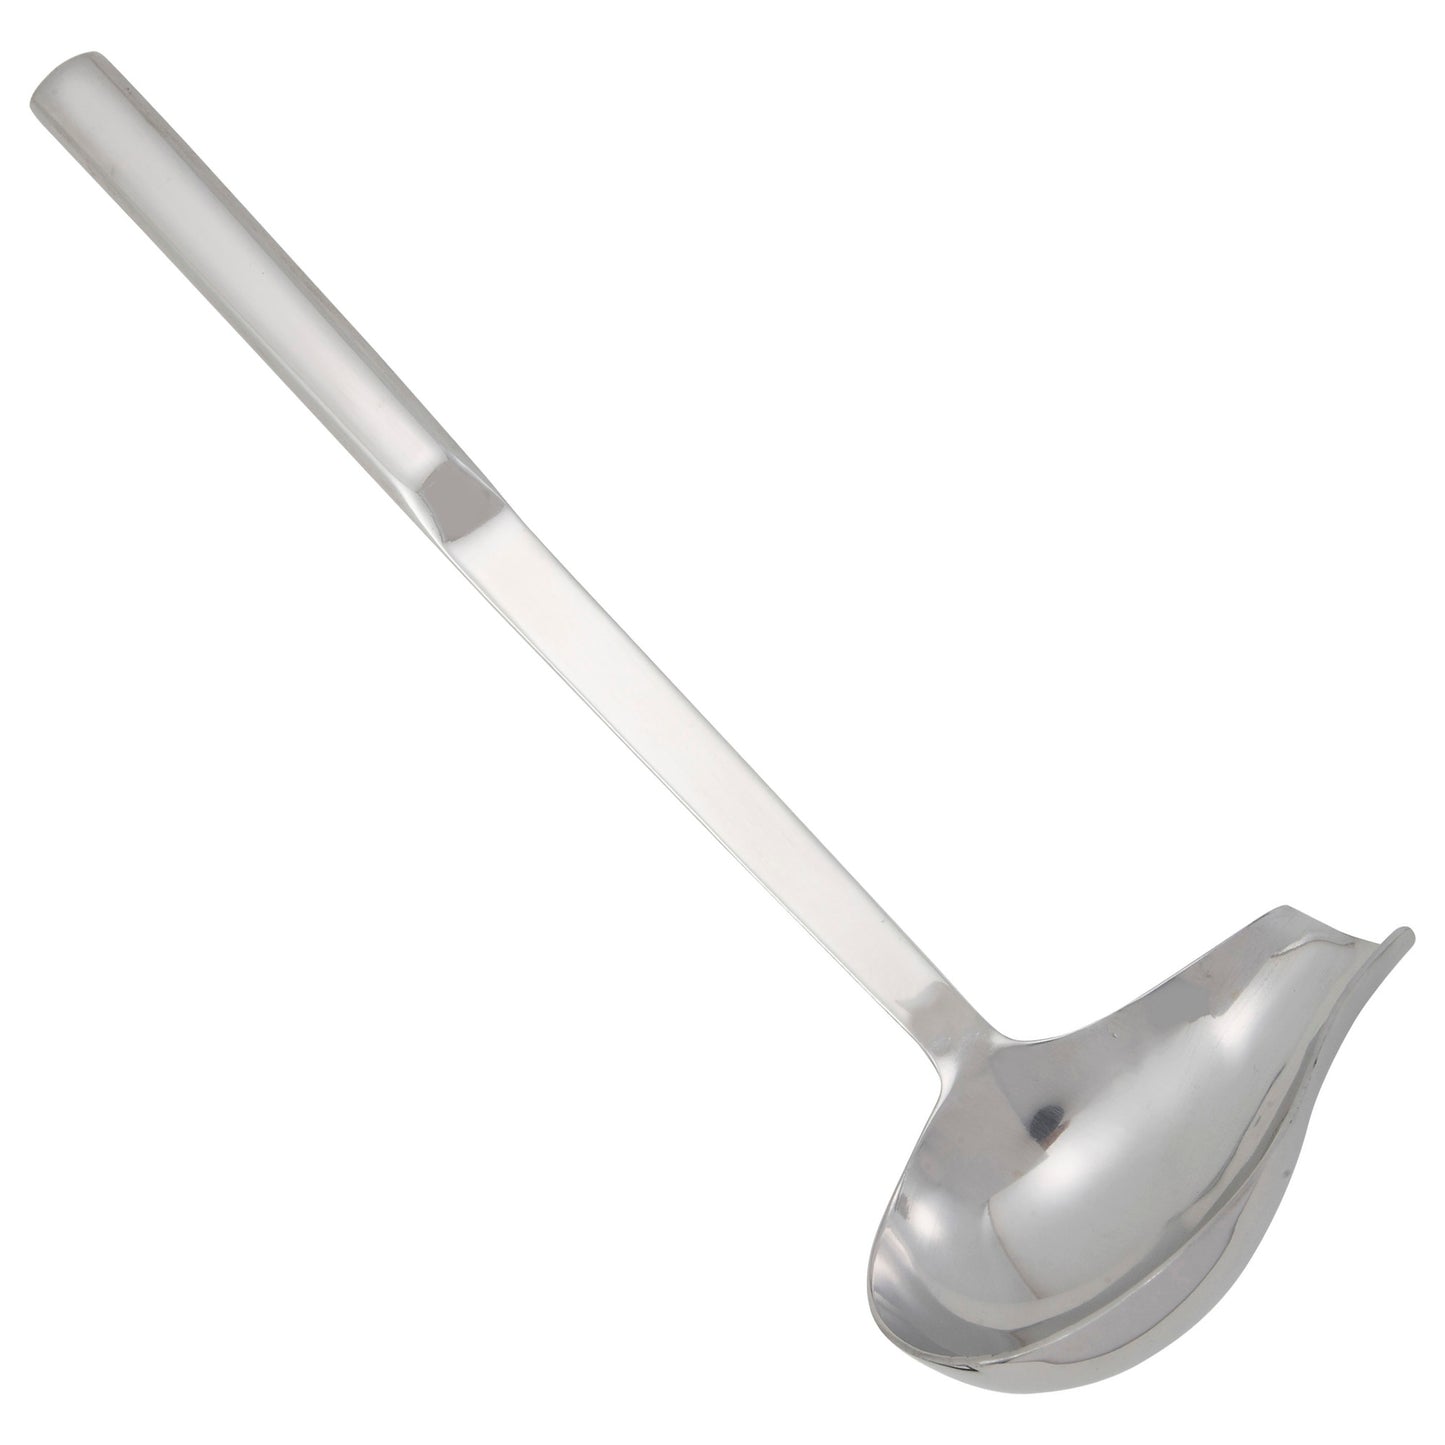 BW-SP2 - 2 oz Spout Ladle, Hollow Handle, Stainless Steel